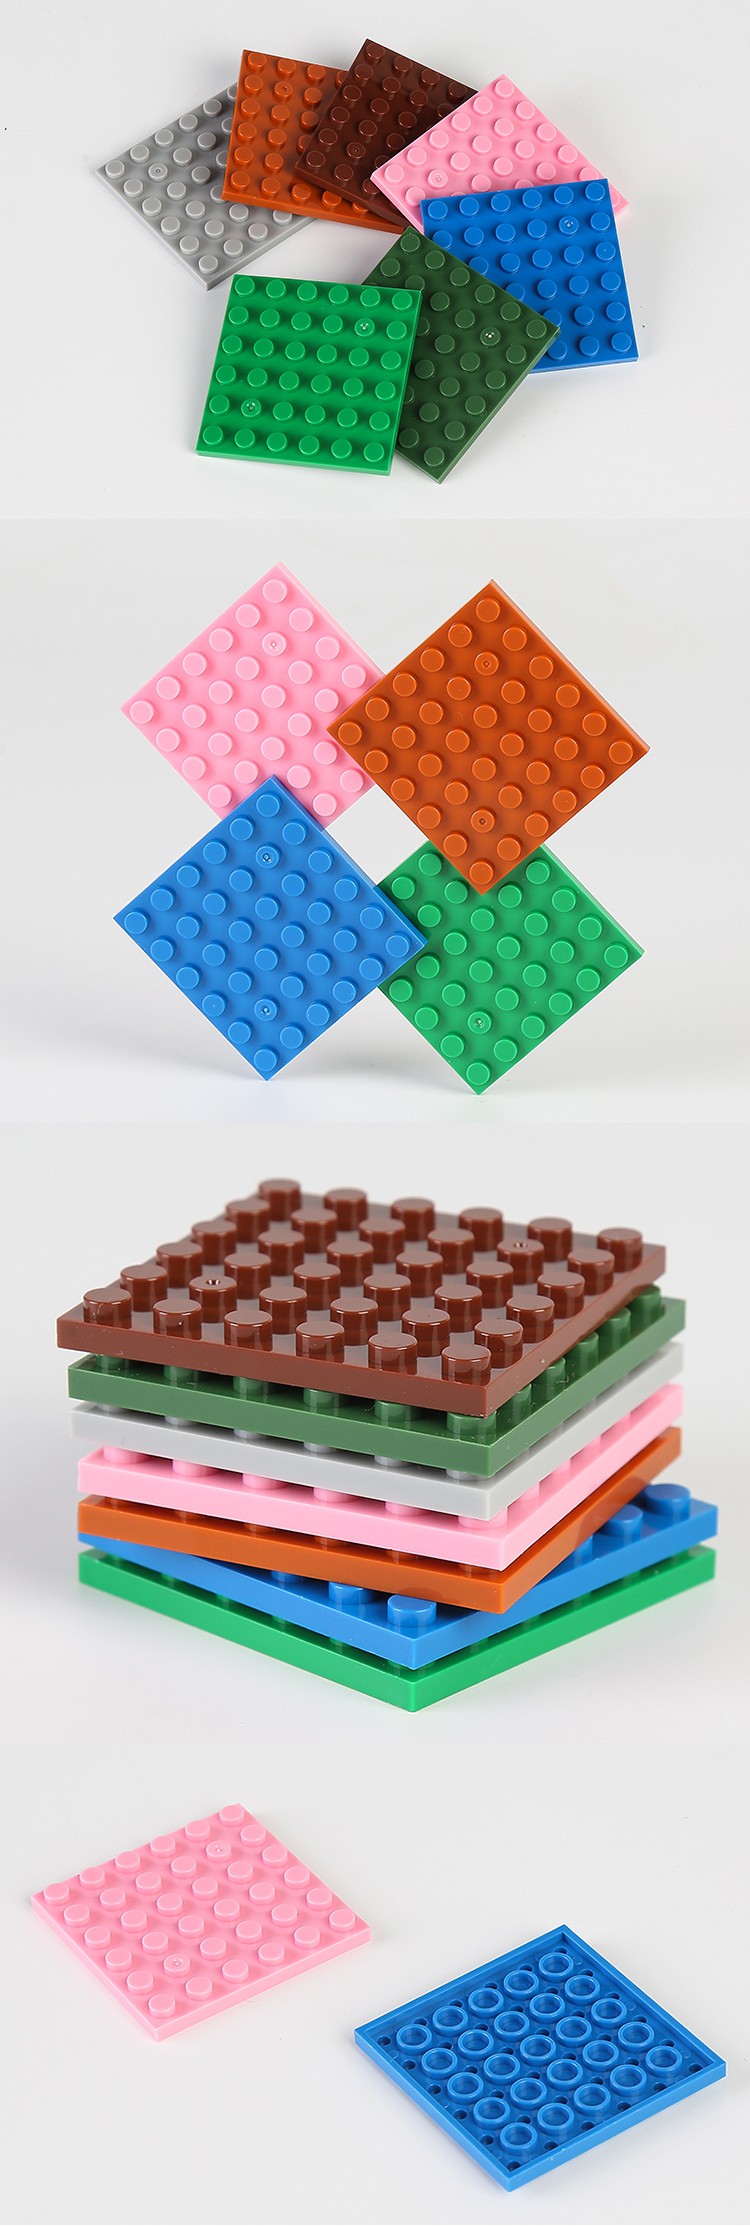 WOMA TOYS Compatible other Brands Brick STEM Accessories Plate 6 x 6 small building block moc 6*6 Base Plate Customization (3958)